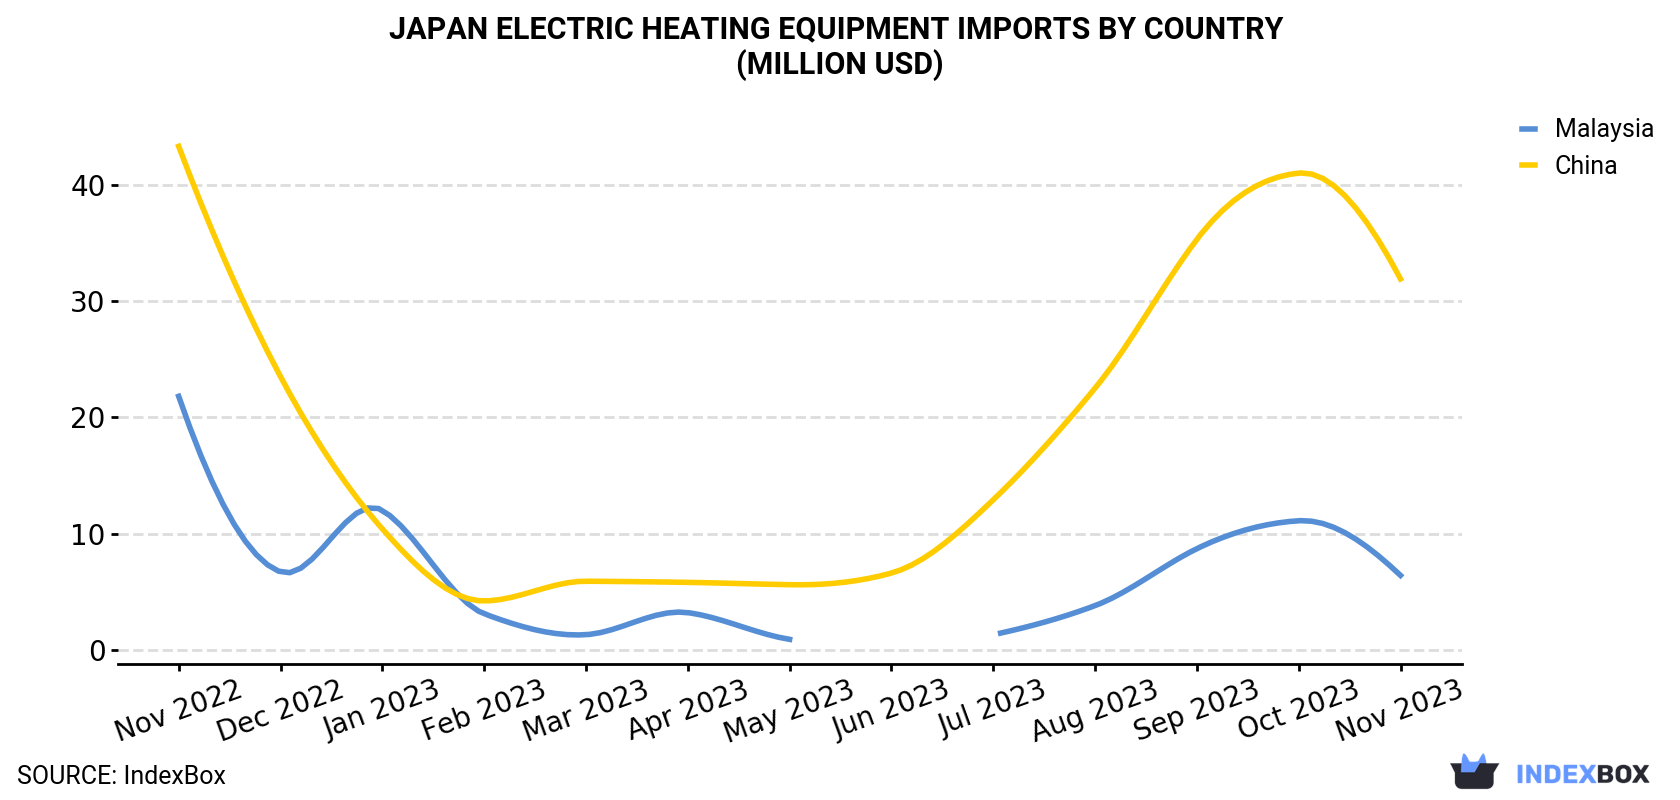 Japan Electric Heating Equipment Imports By Country (Million USD)